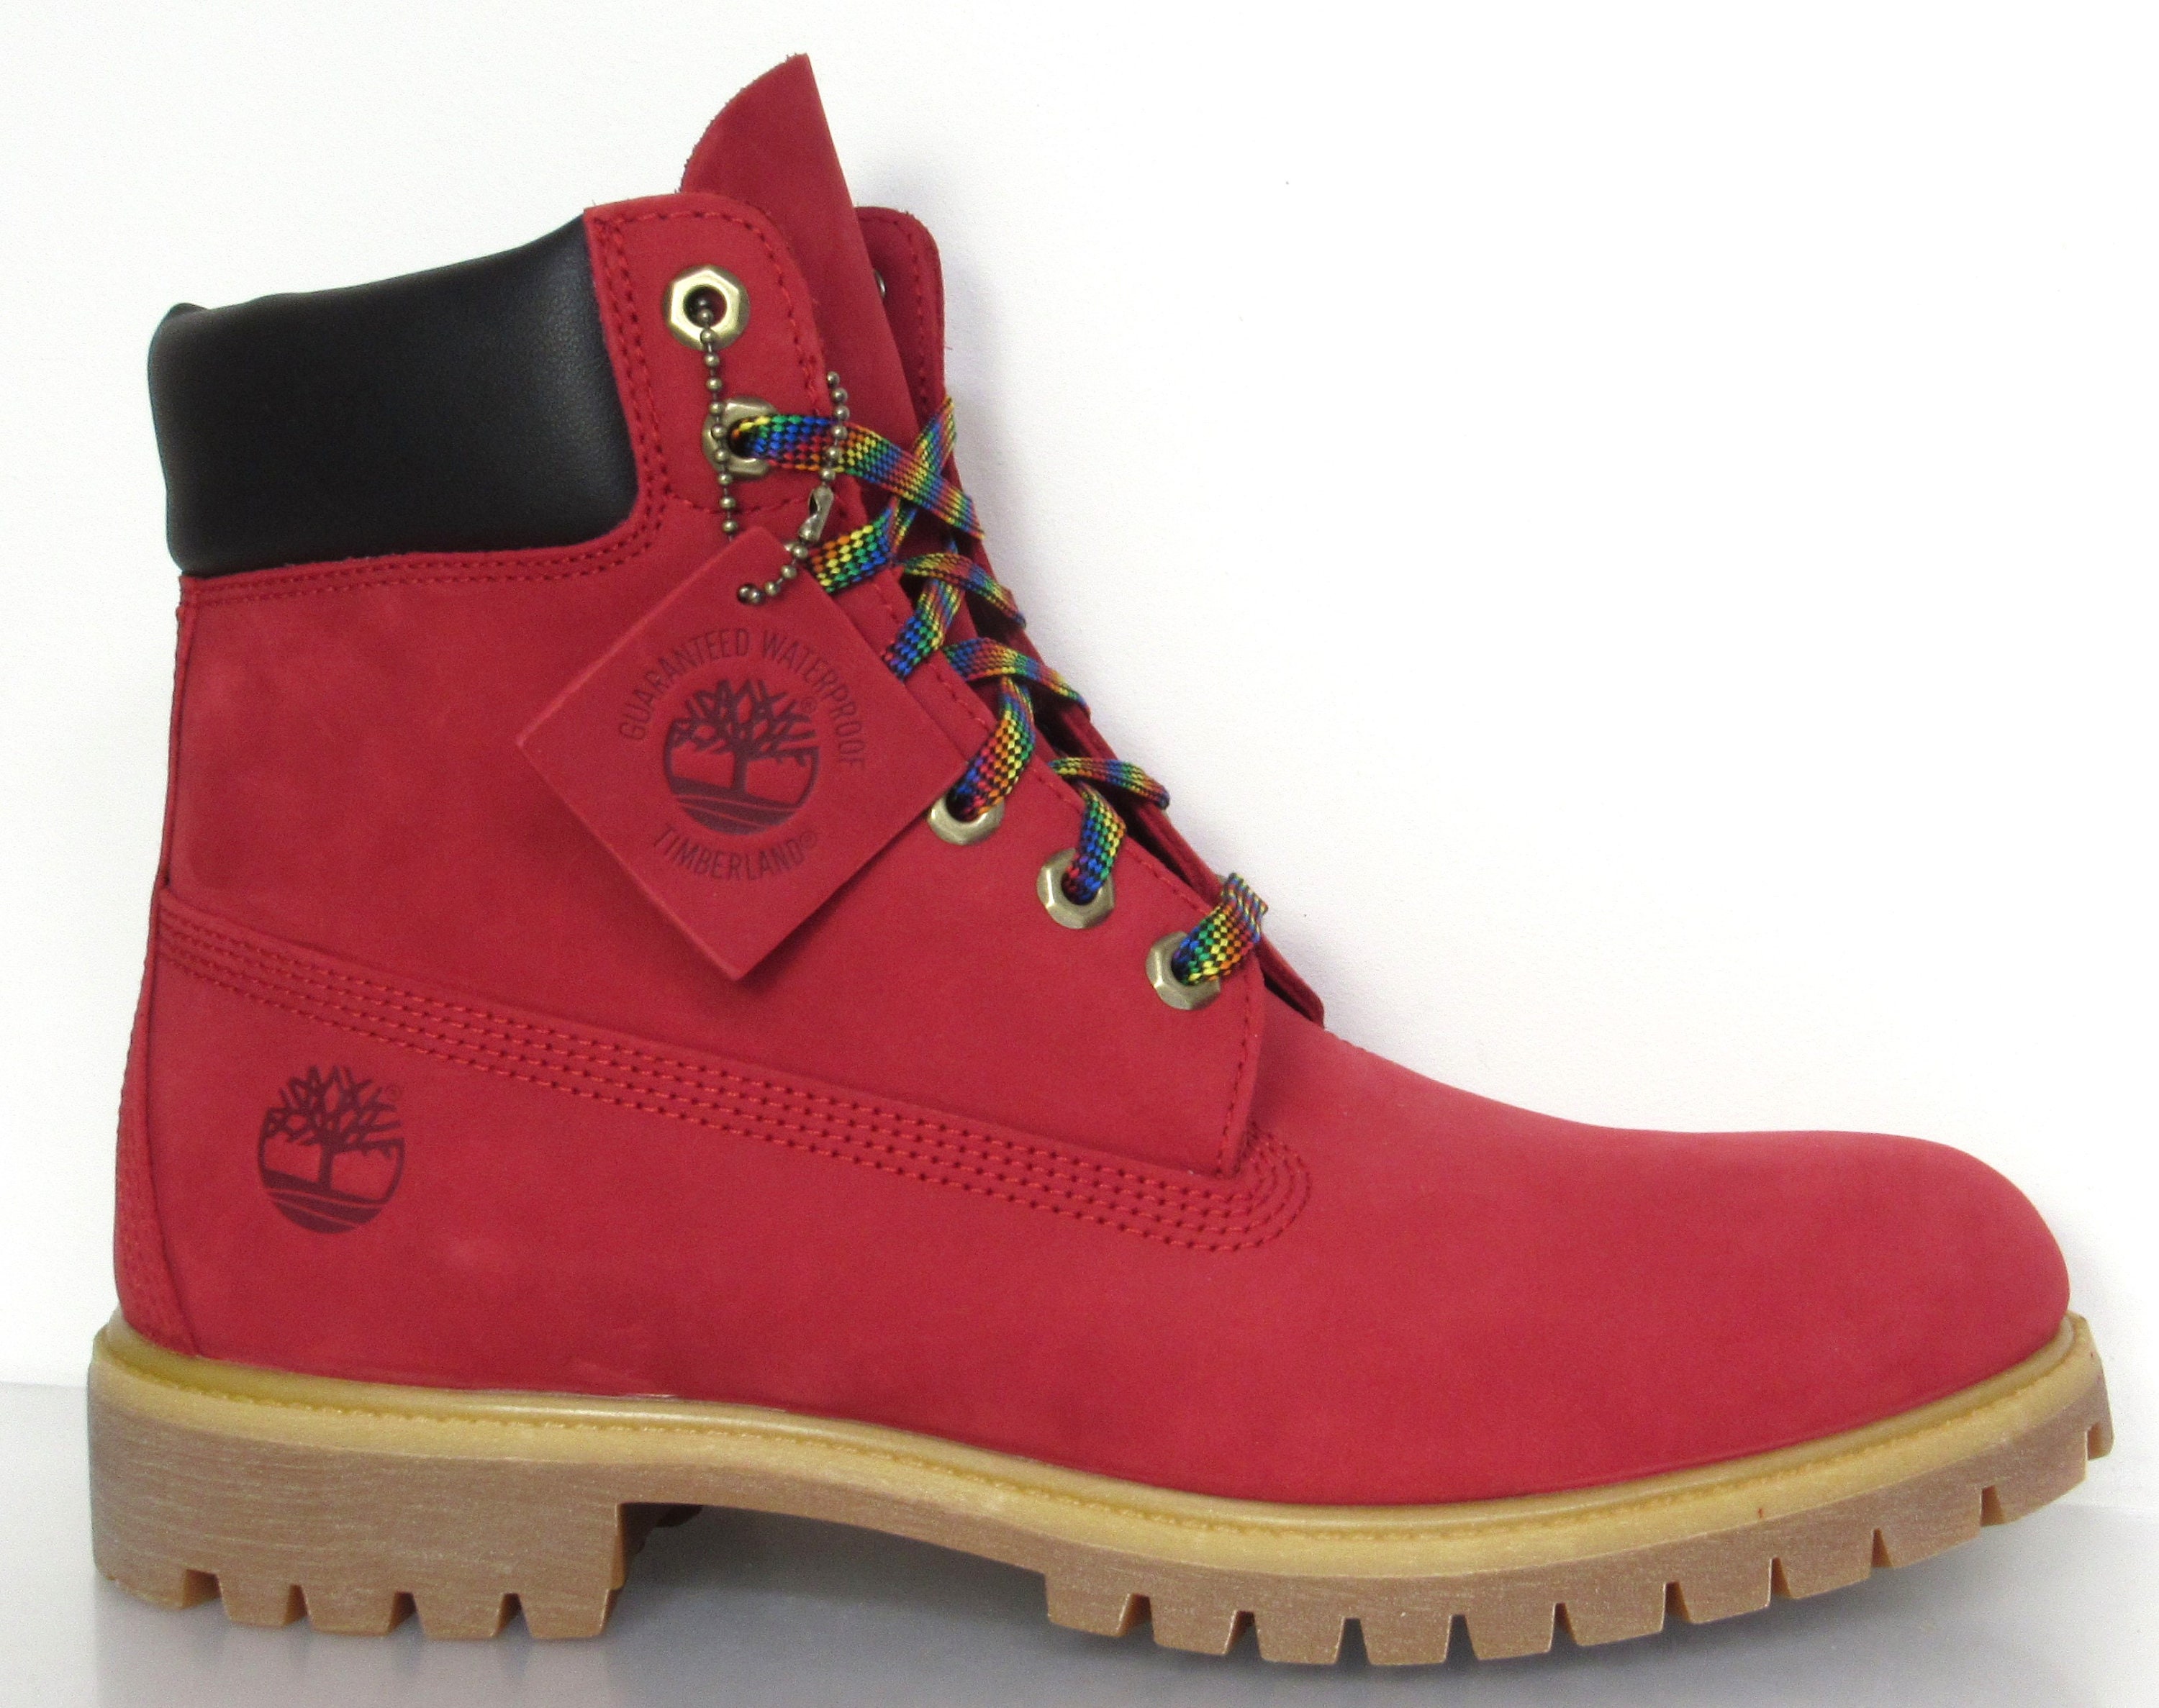 Timberland Custom Boots Men Brown White - RvceShops - Lily crystal